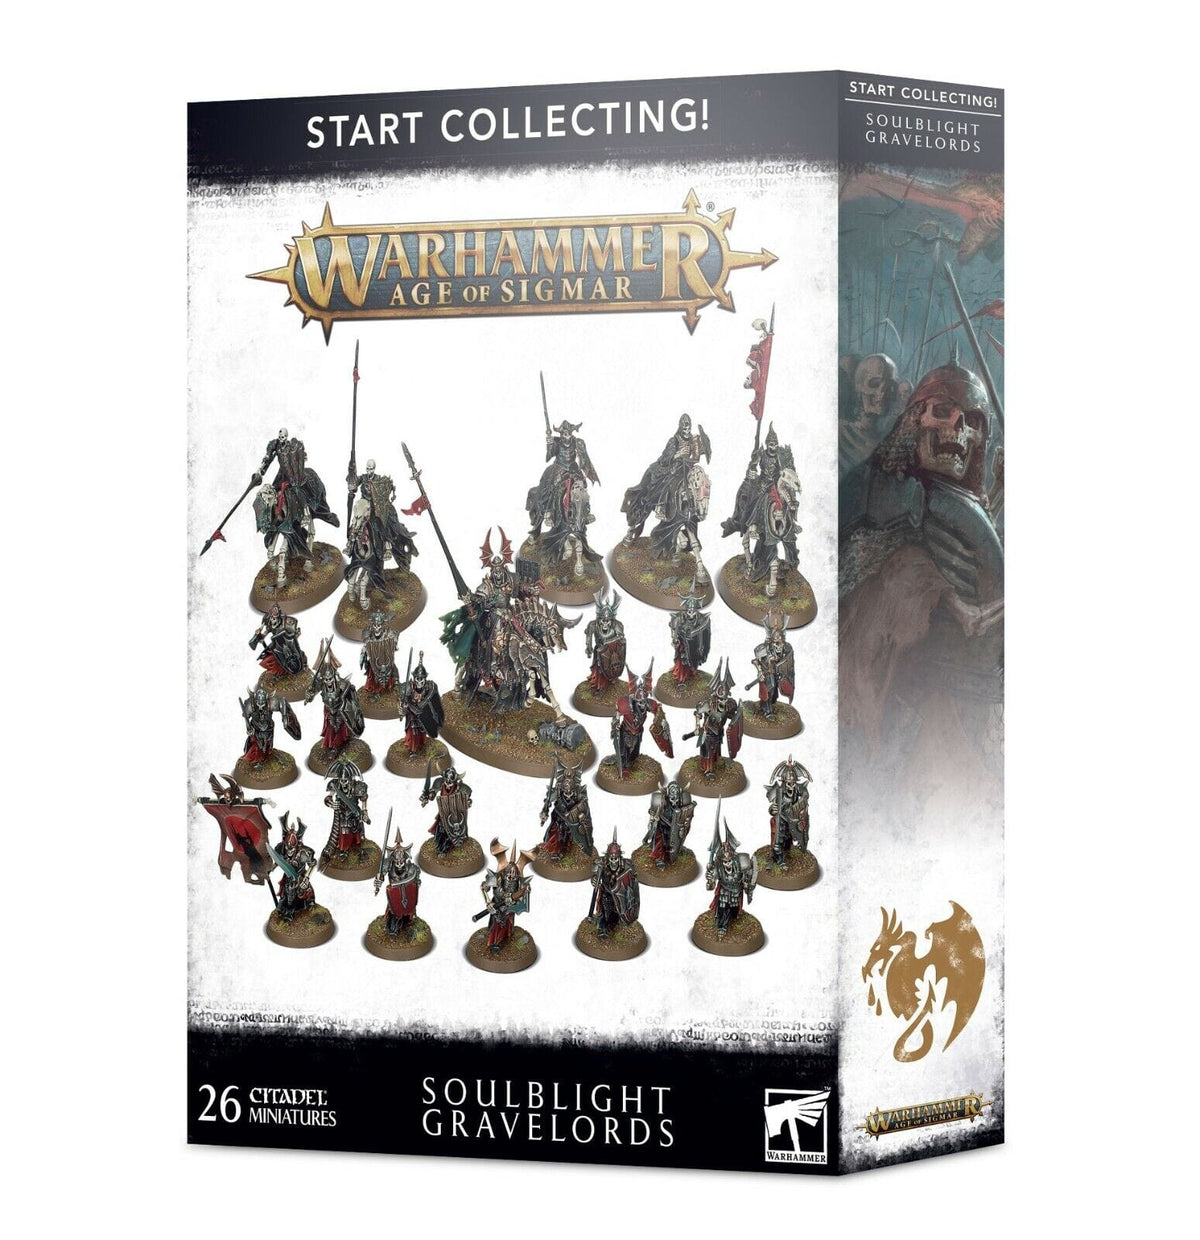 Warhammer - Age of Sigmar: Soulblight Gravelords - Start Collecting! - Third Eye